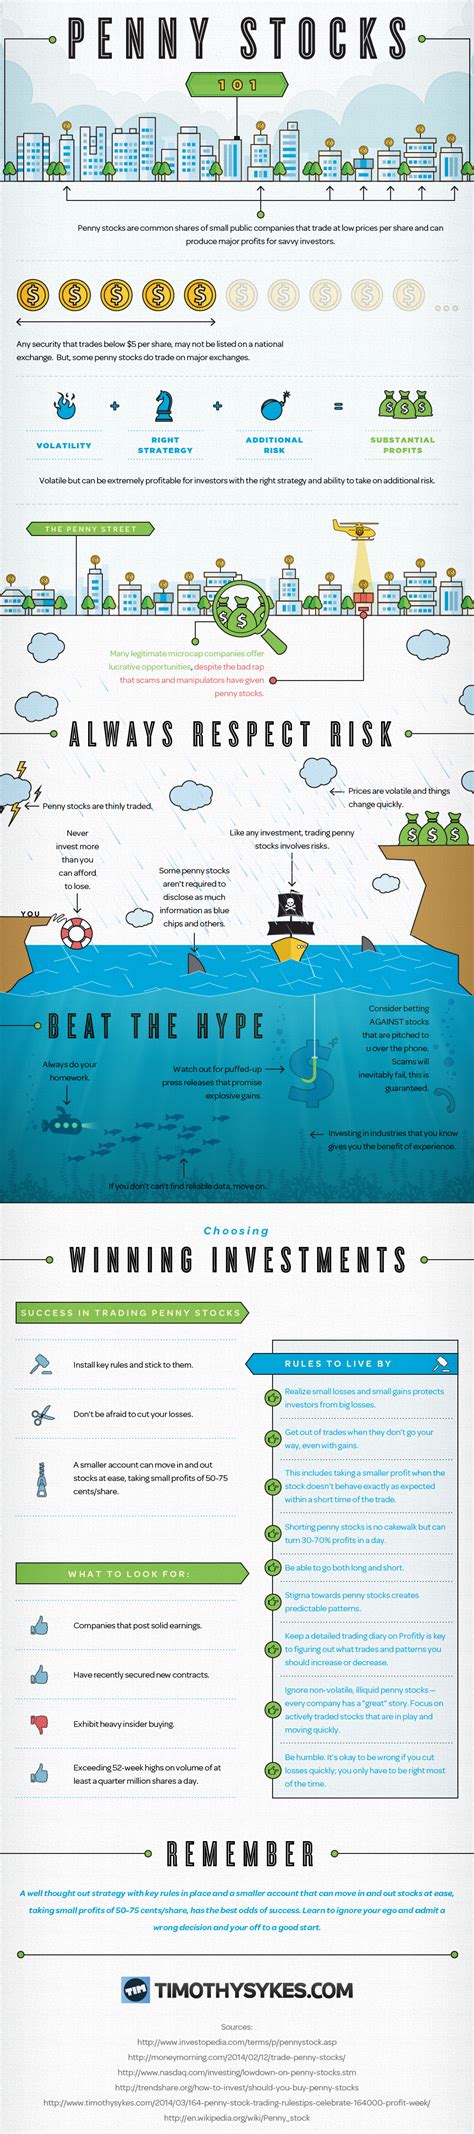 Penny stocks are volatile and can generate catastrophic losses. Penny Stocks 101 Infographic - Timothy Sykes